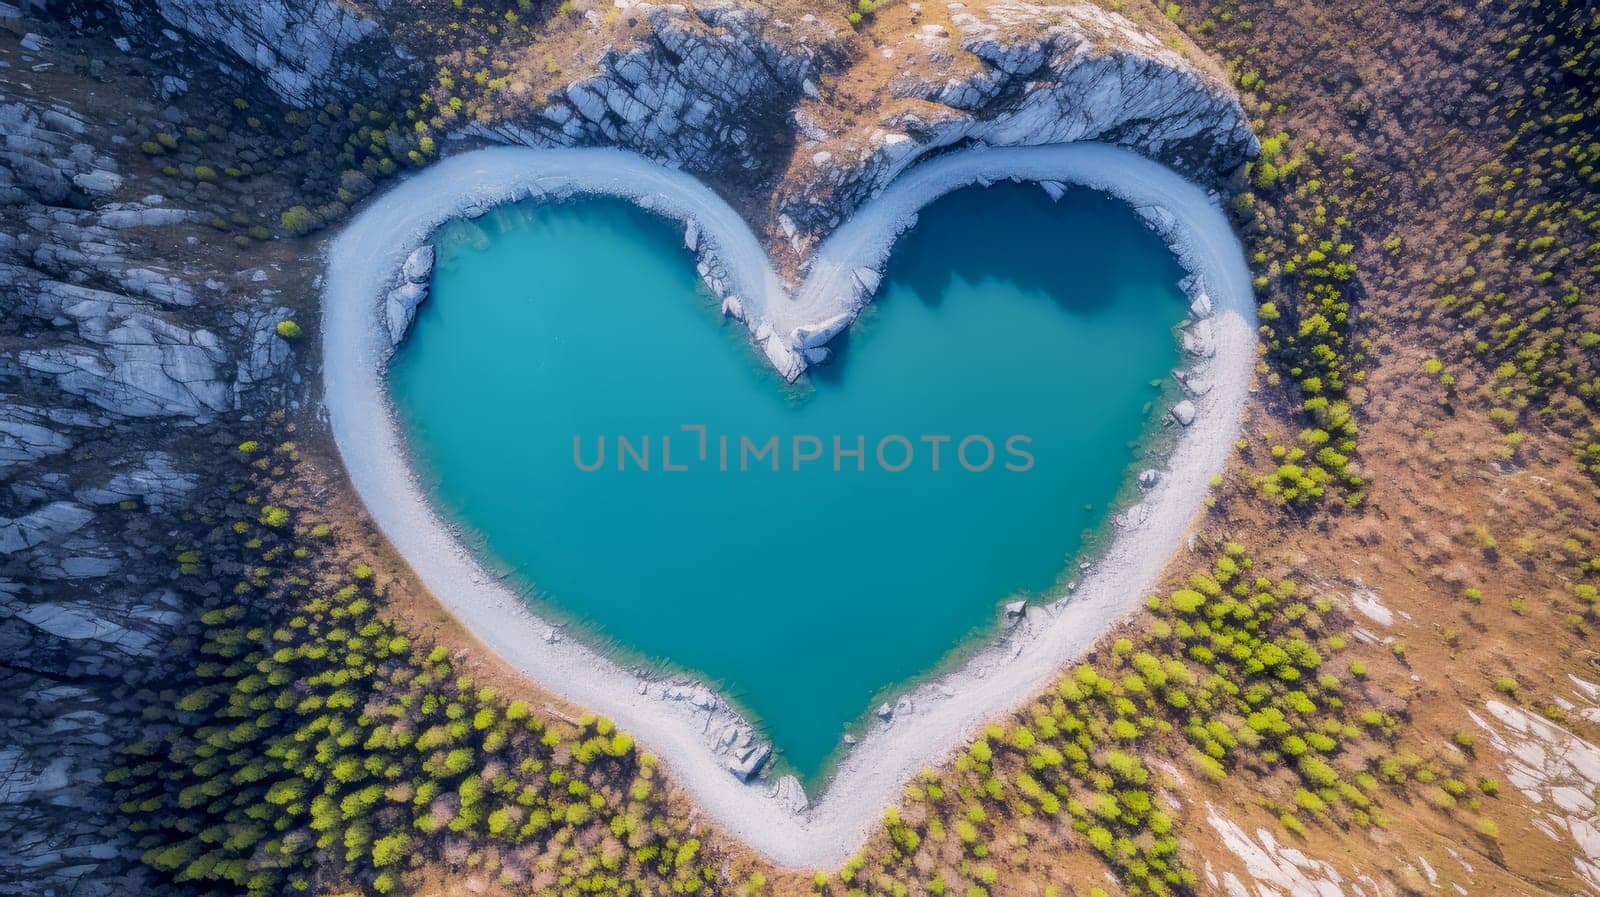 Beautiful clear lake in the shape of a heart in the mountains and rocks. Tourist place to relax. Beautiful landscape, picture, phone screensaver, copy space, advertising, travel agency, tourism, solitude with nature, without people